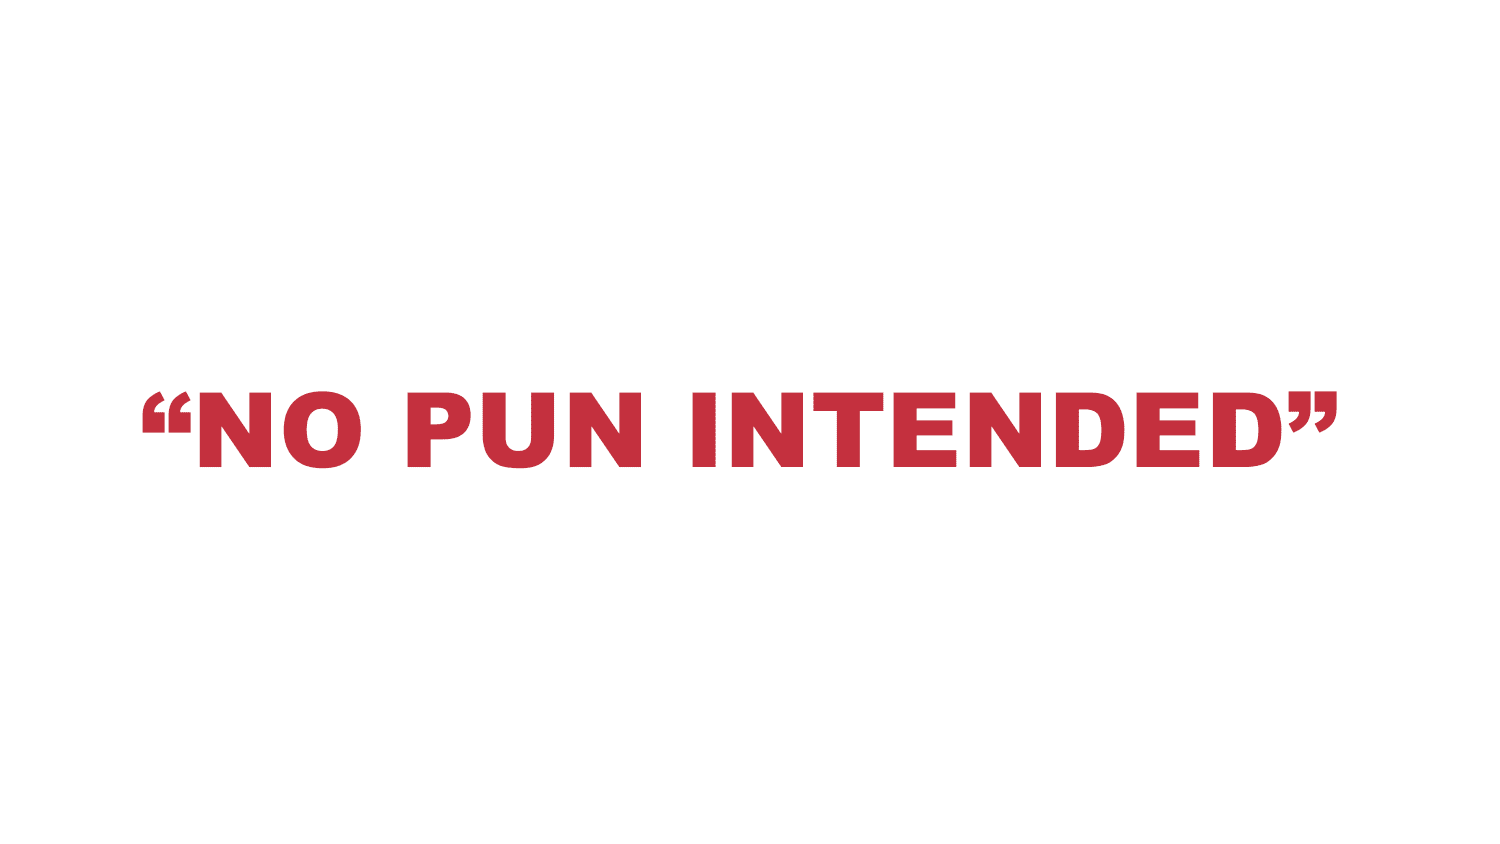 What does “No pun intended” mean?